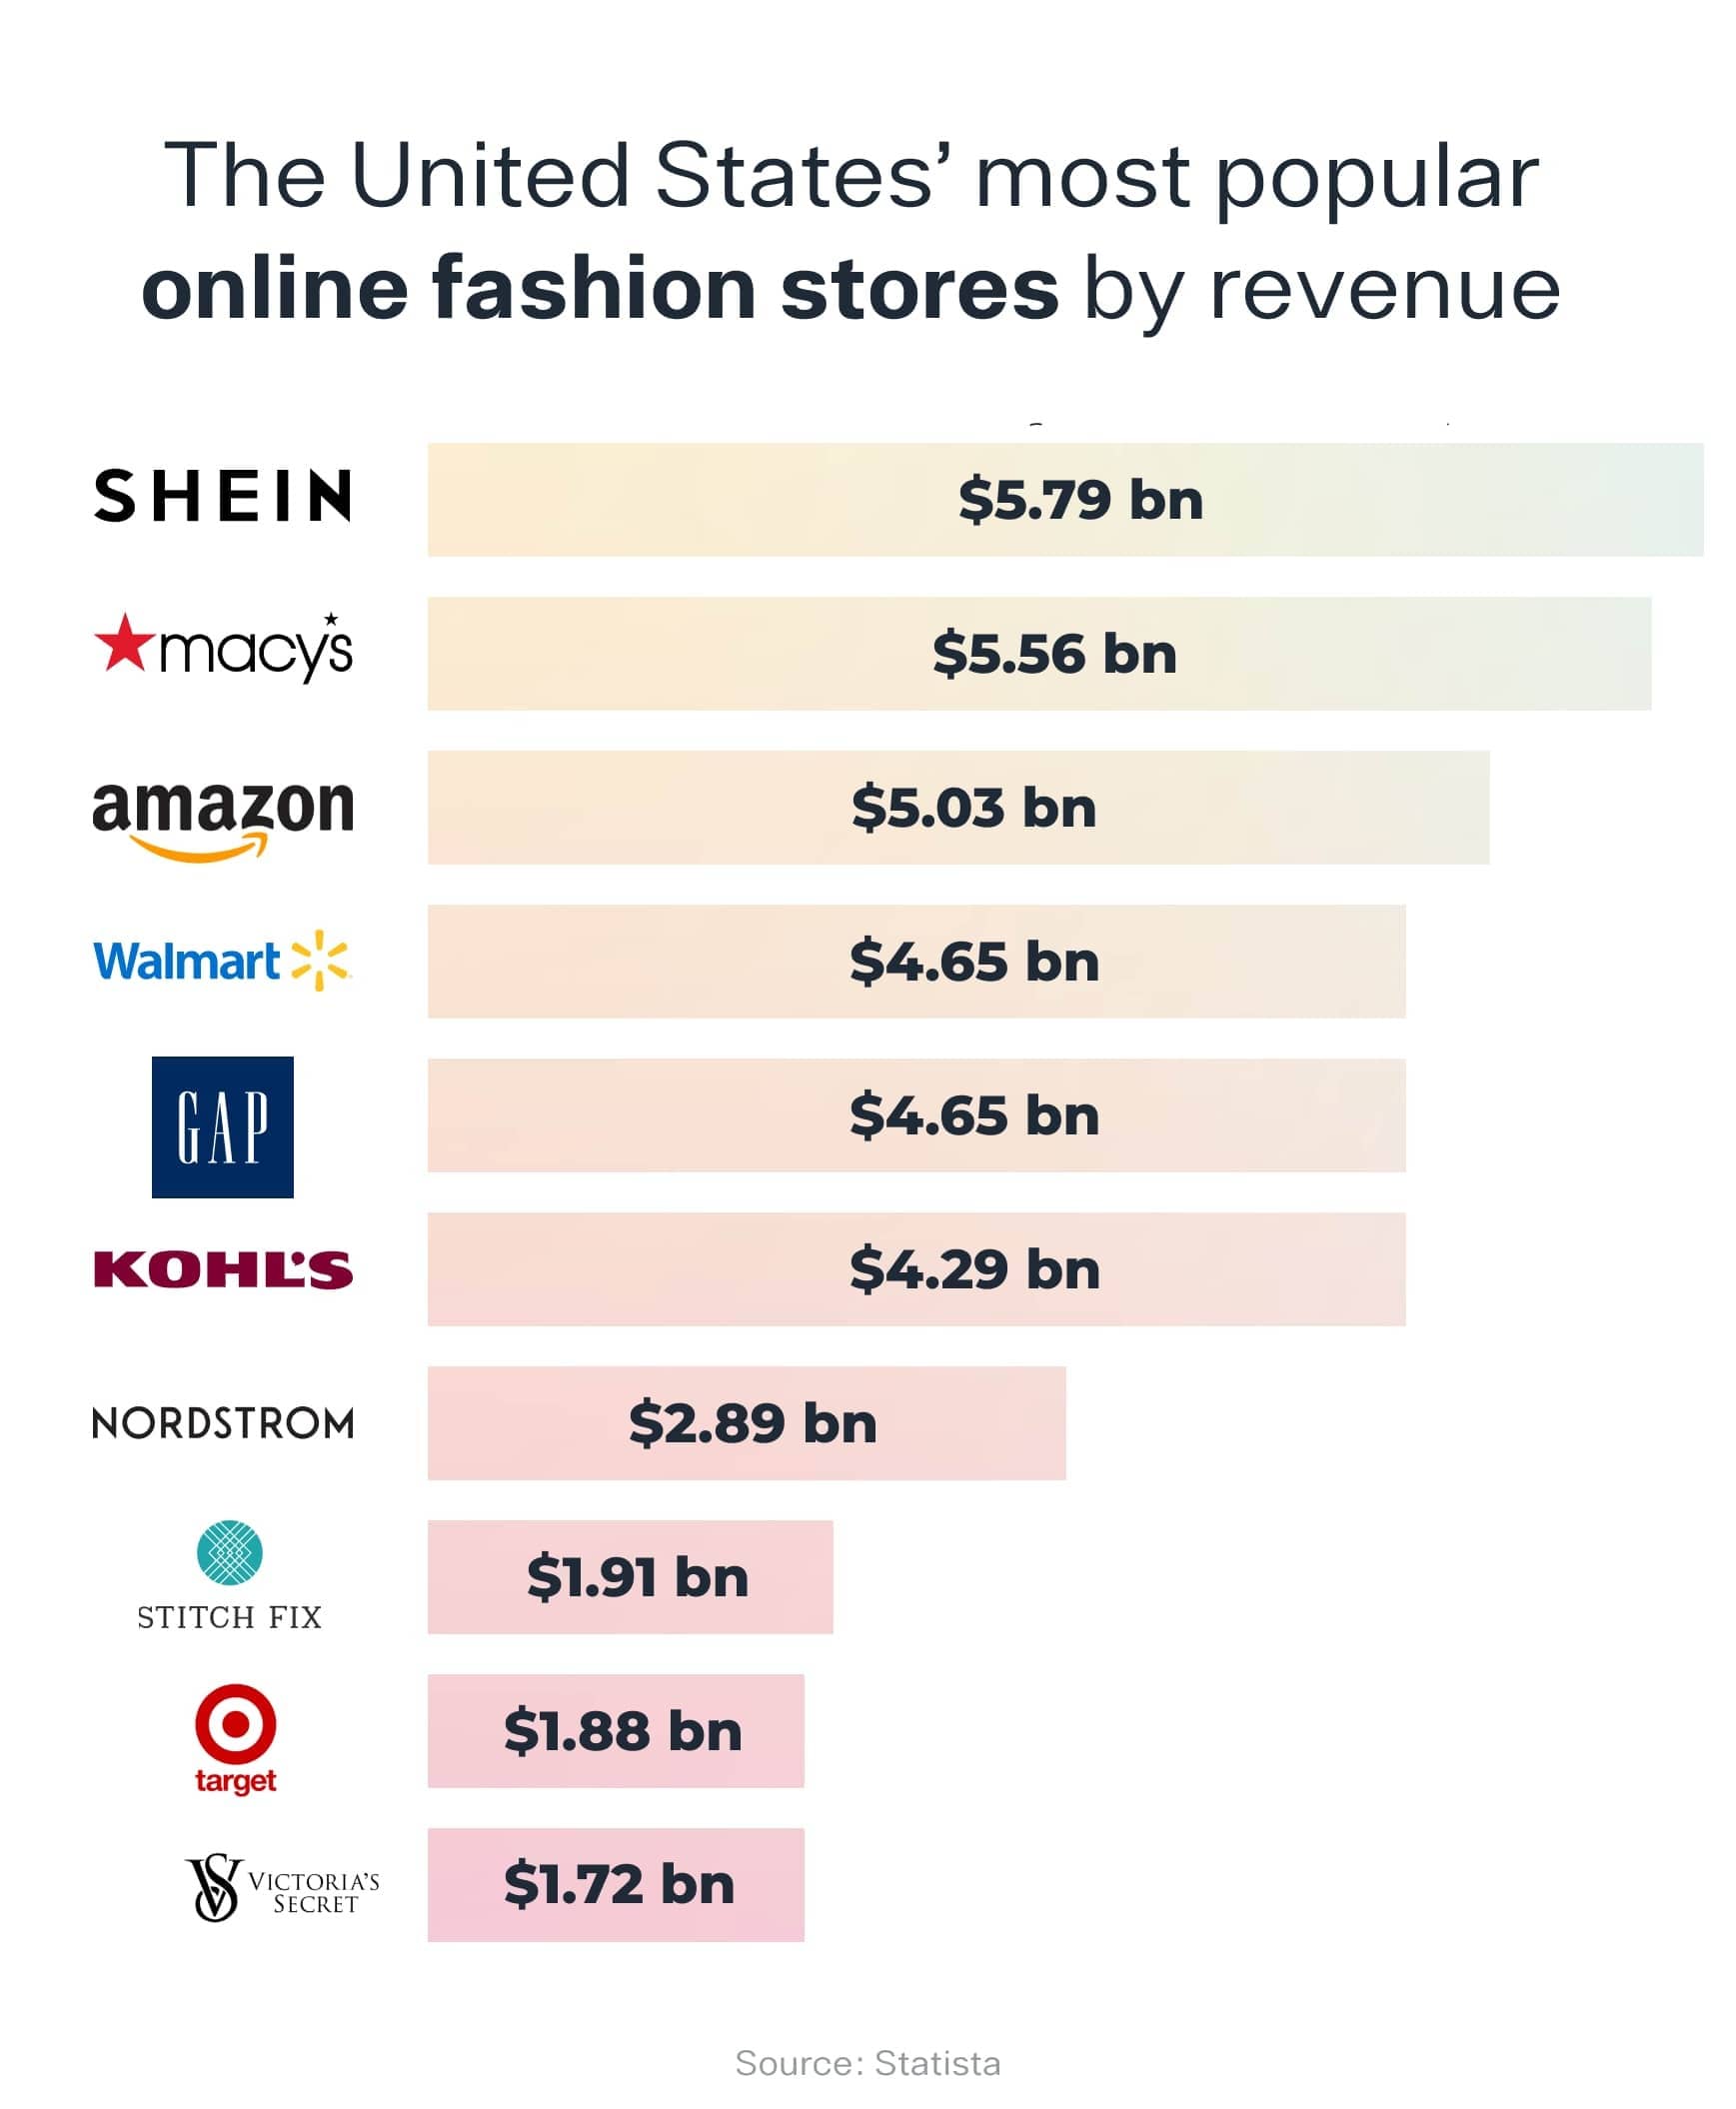 The United States' most popular online fashion stores by revenue